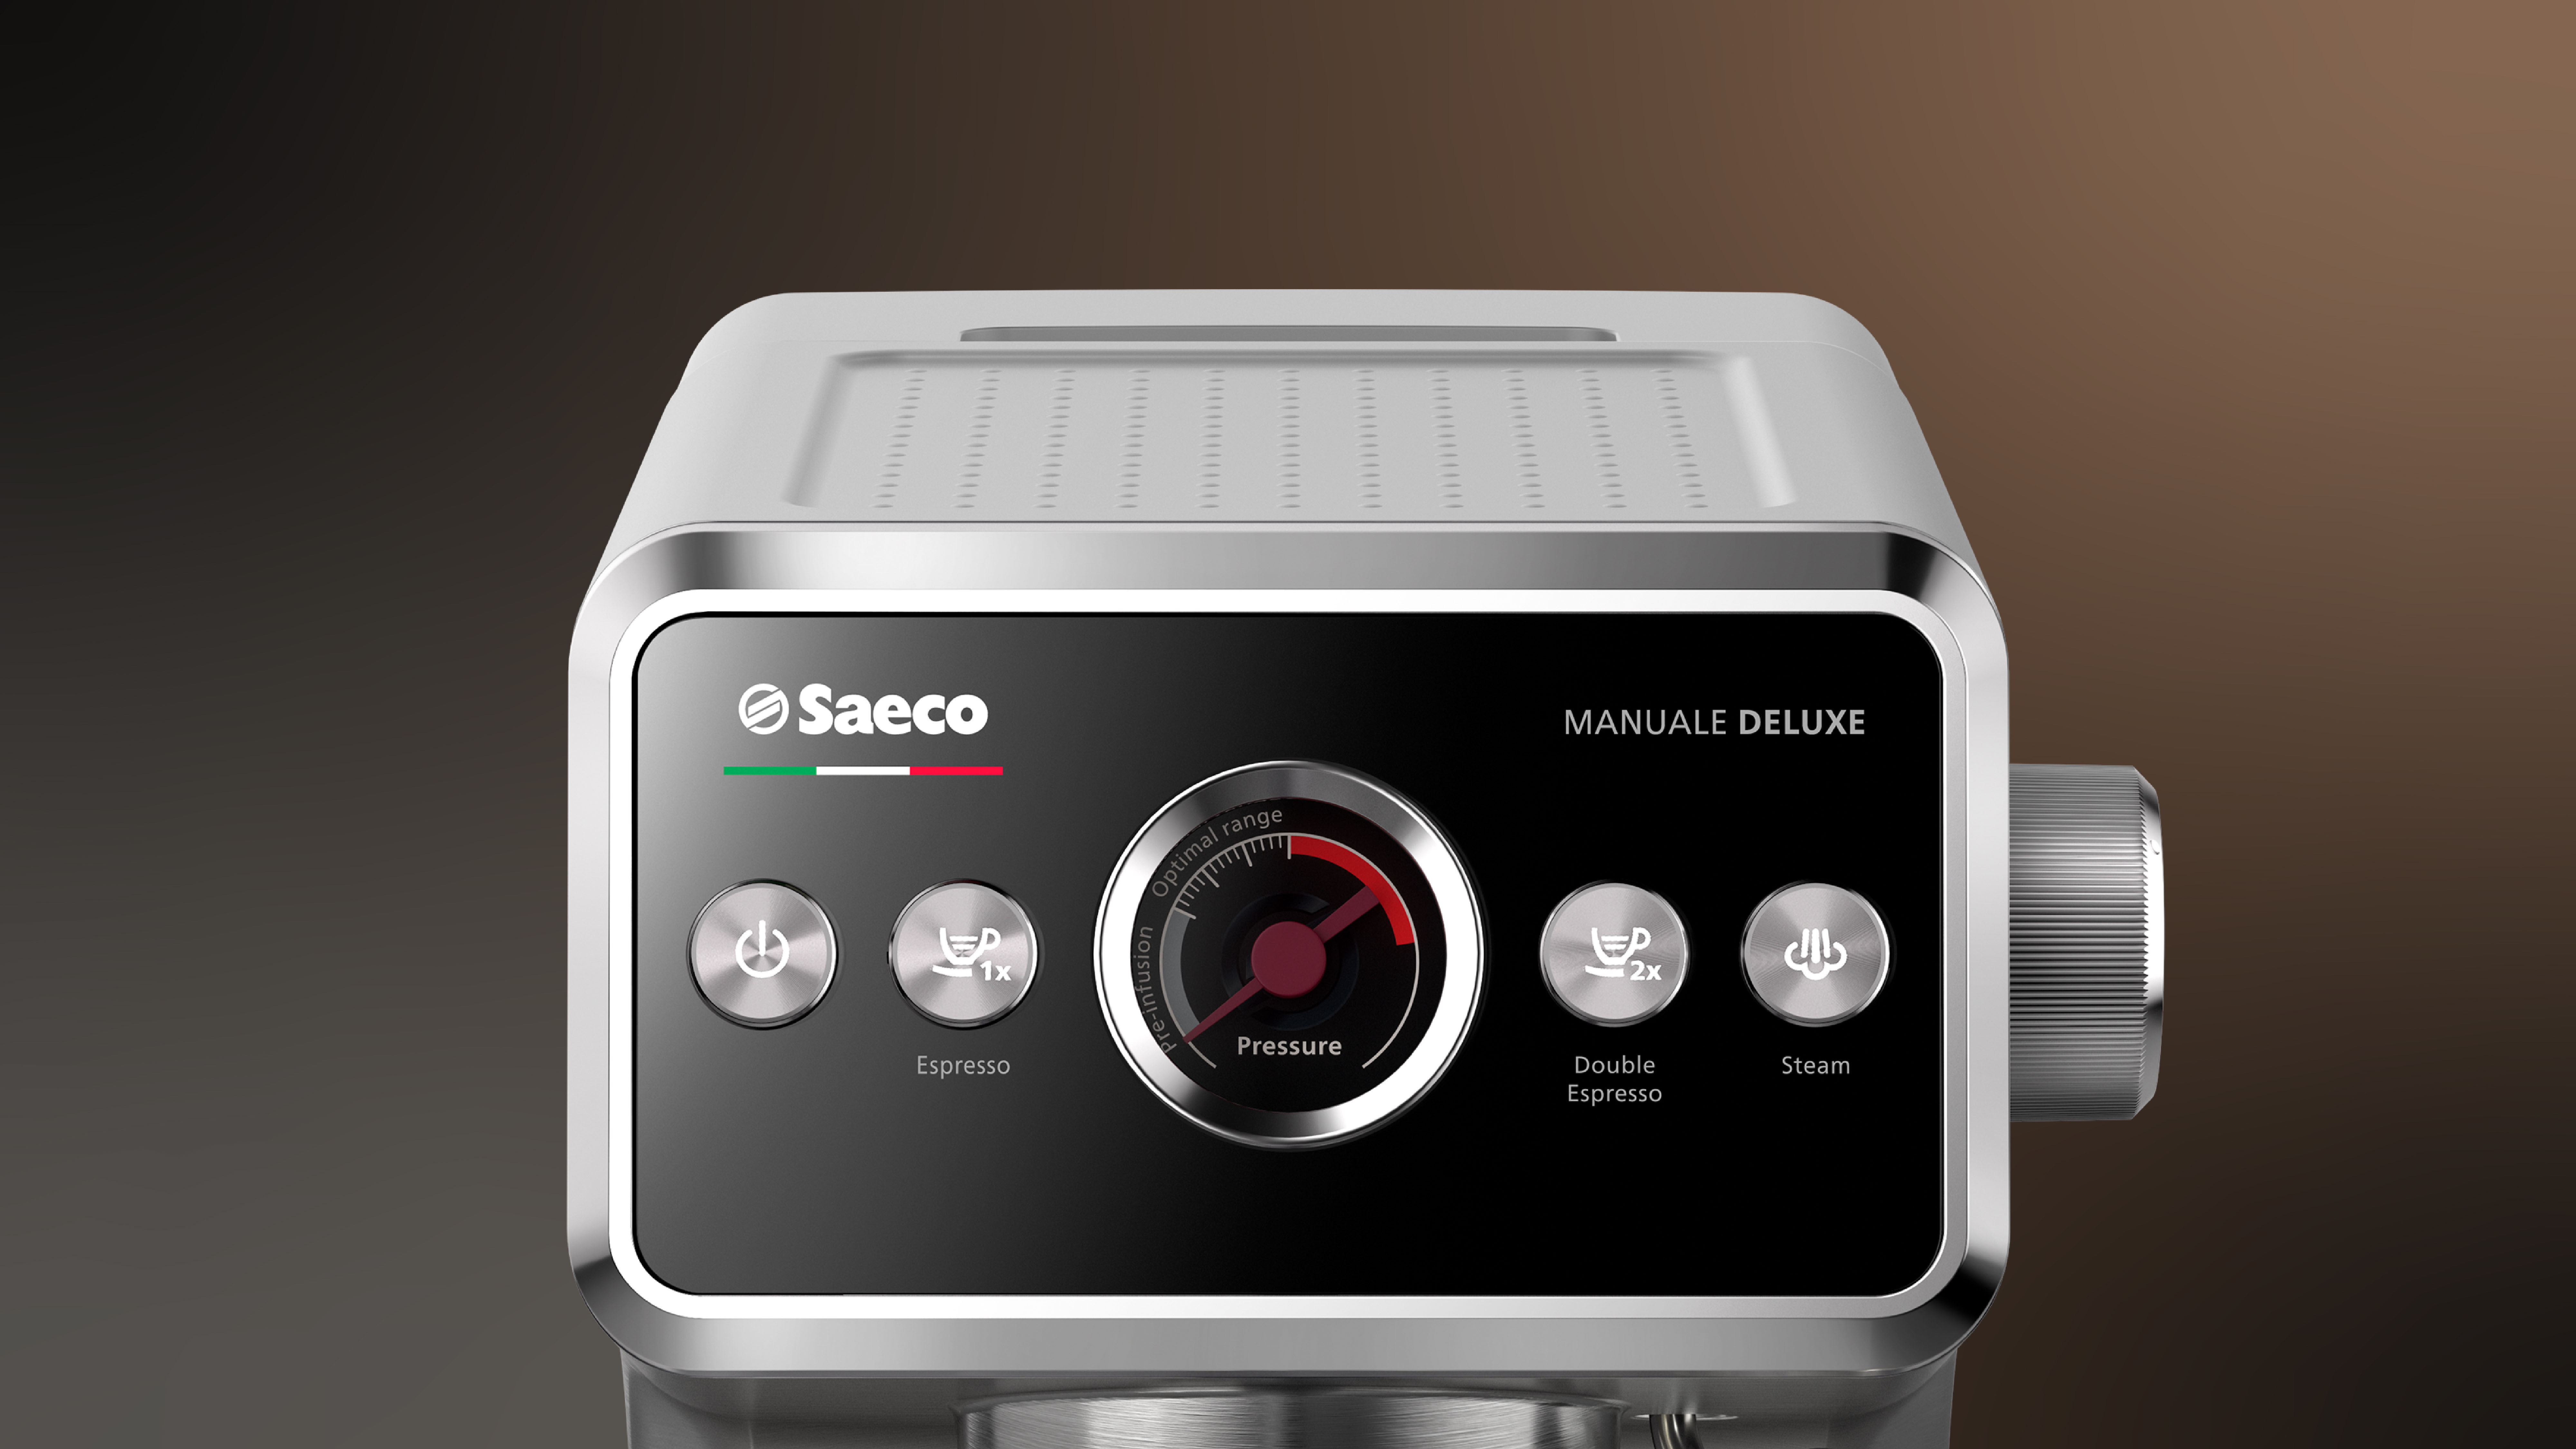 Saeco Manuale Deluxe